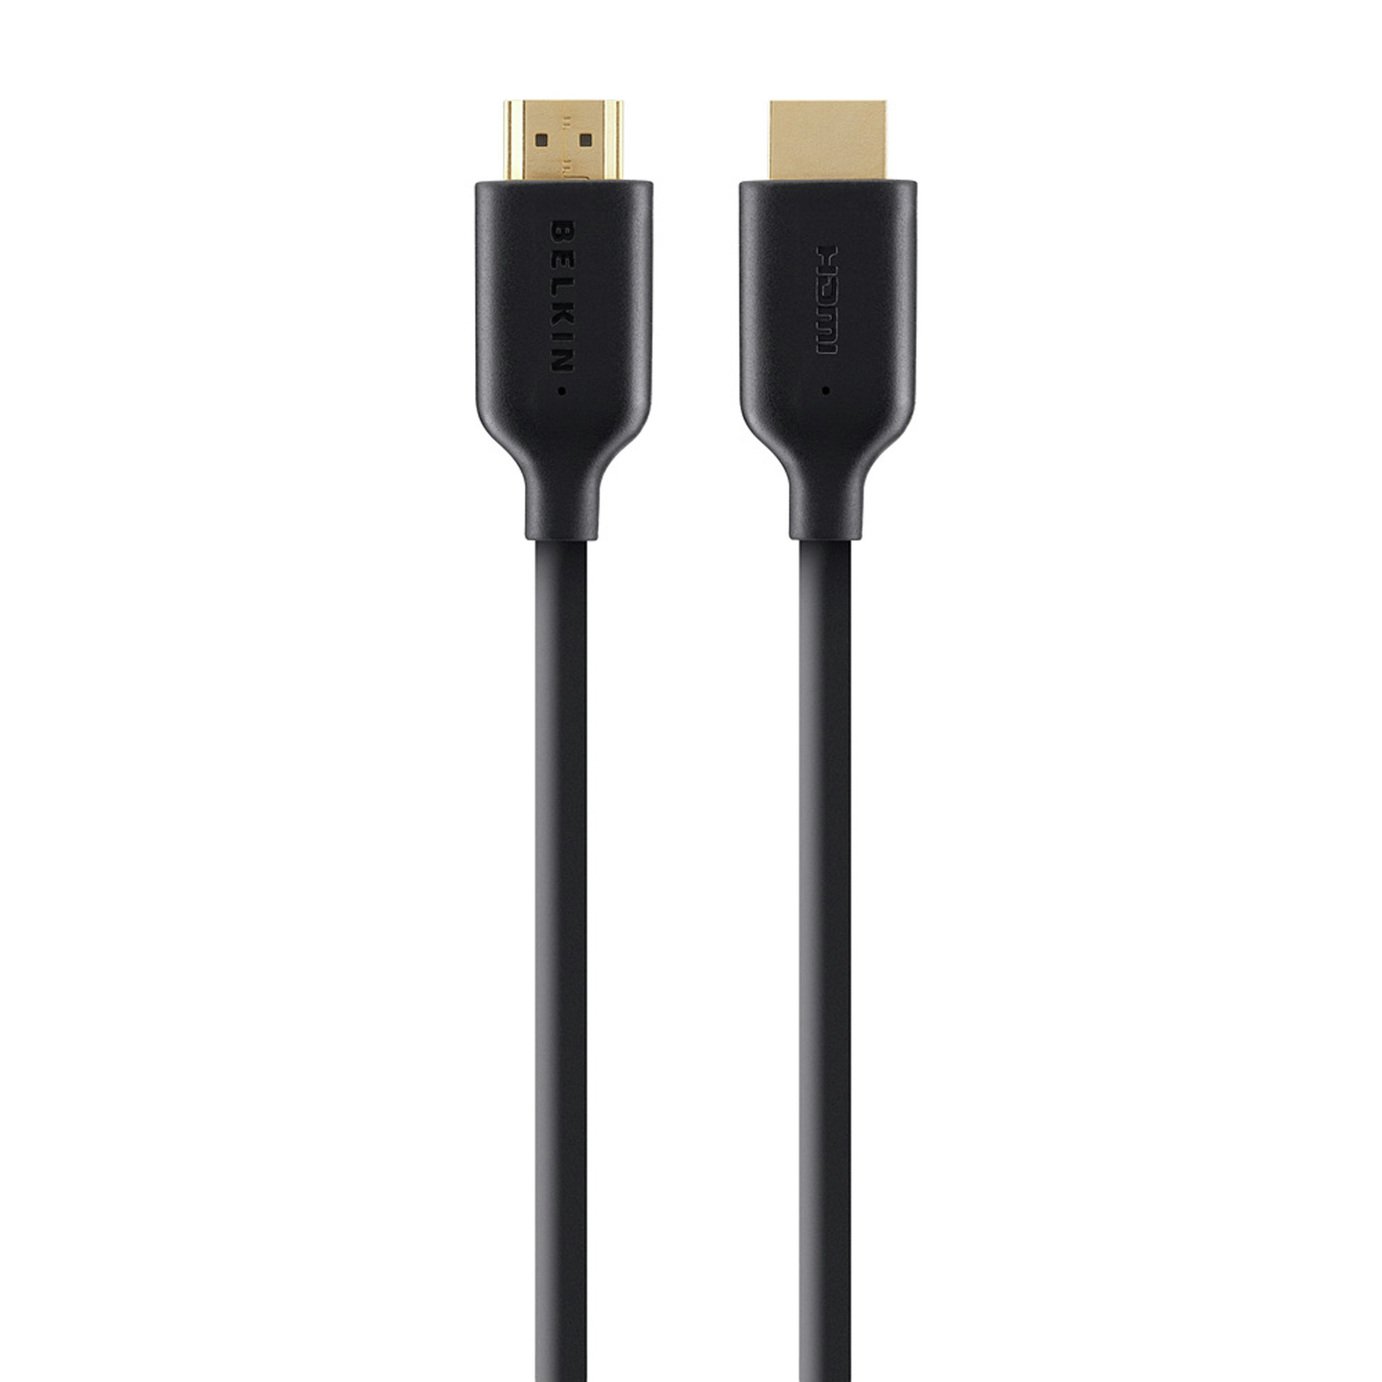 Belkin 1m Hi-Speed HDMI with Ethernet Cable Review